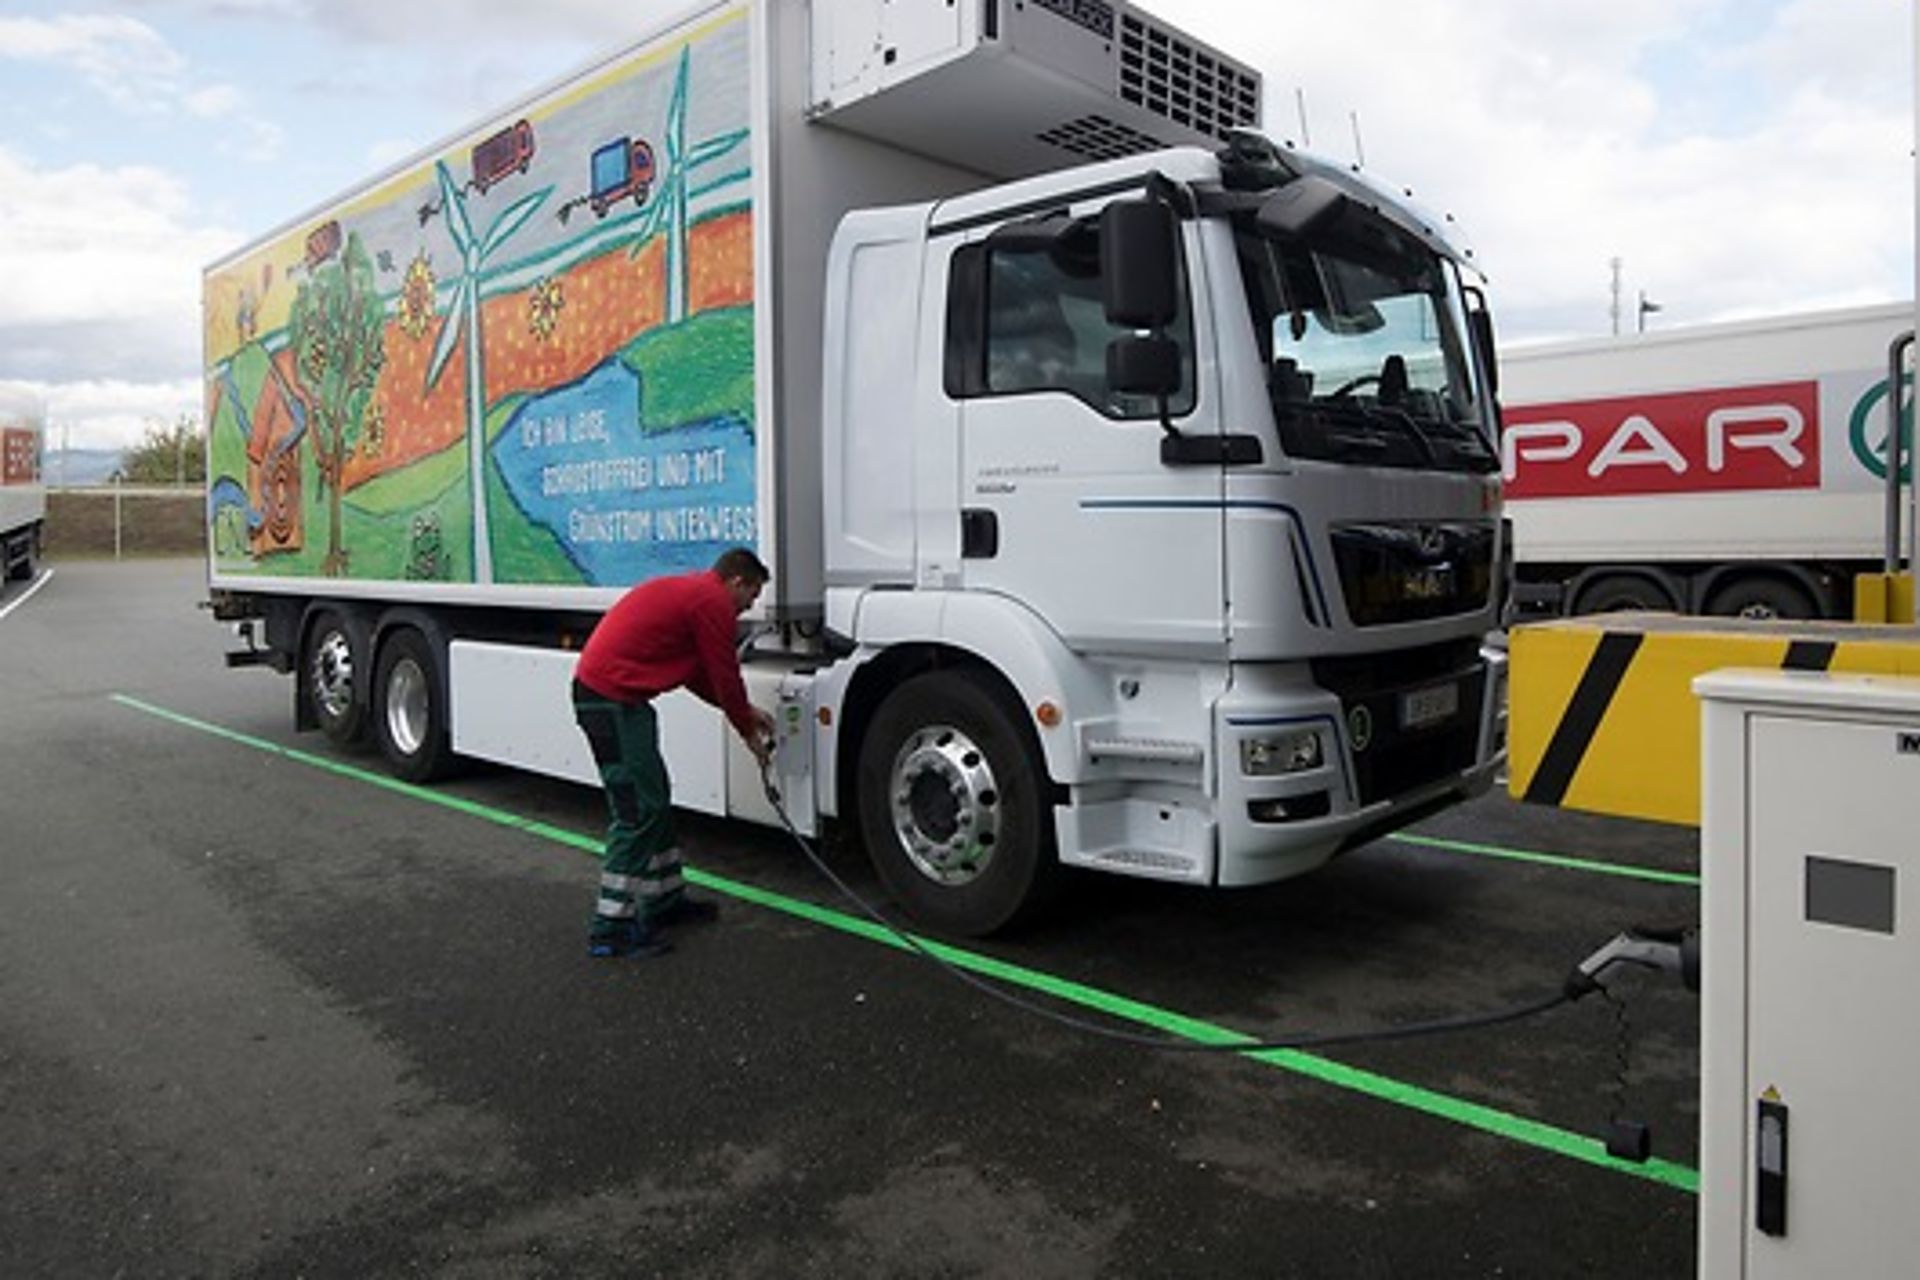 The eTruck has a “green” parking space with a 44kW power connection in the courtyard of the SPAR headquarters.
                 